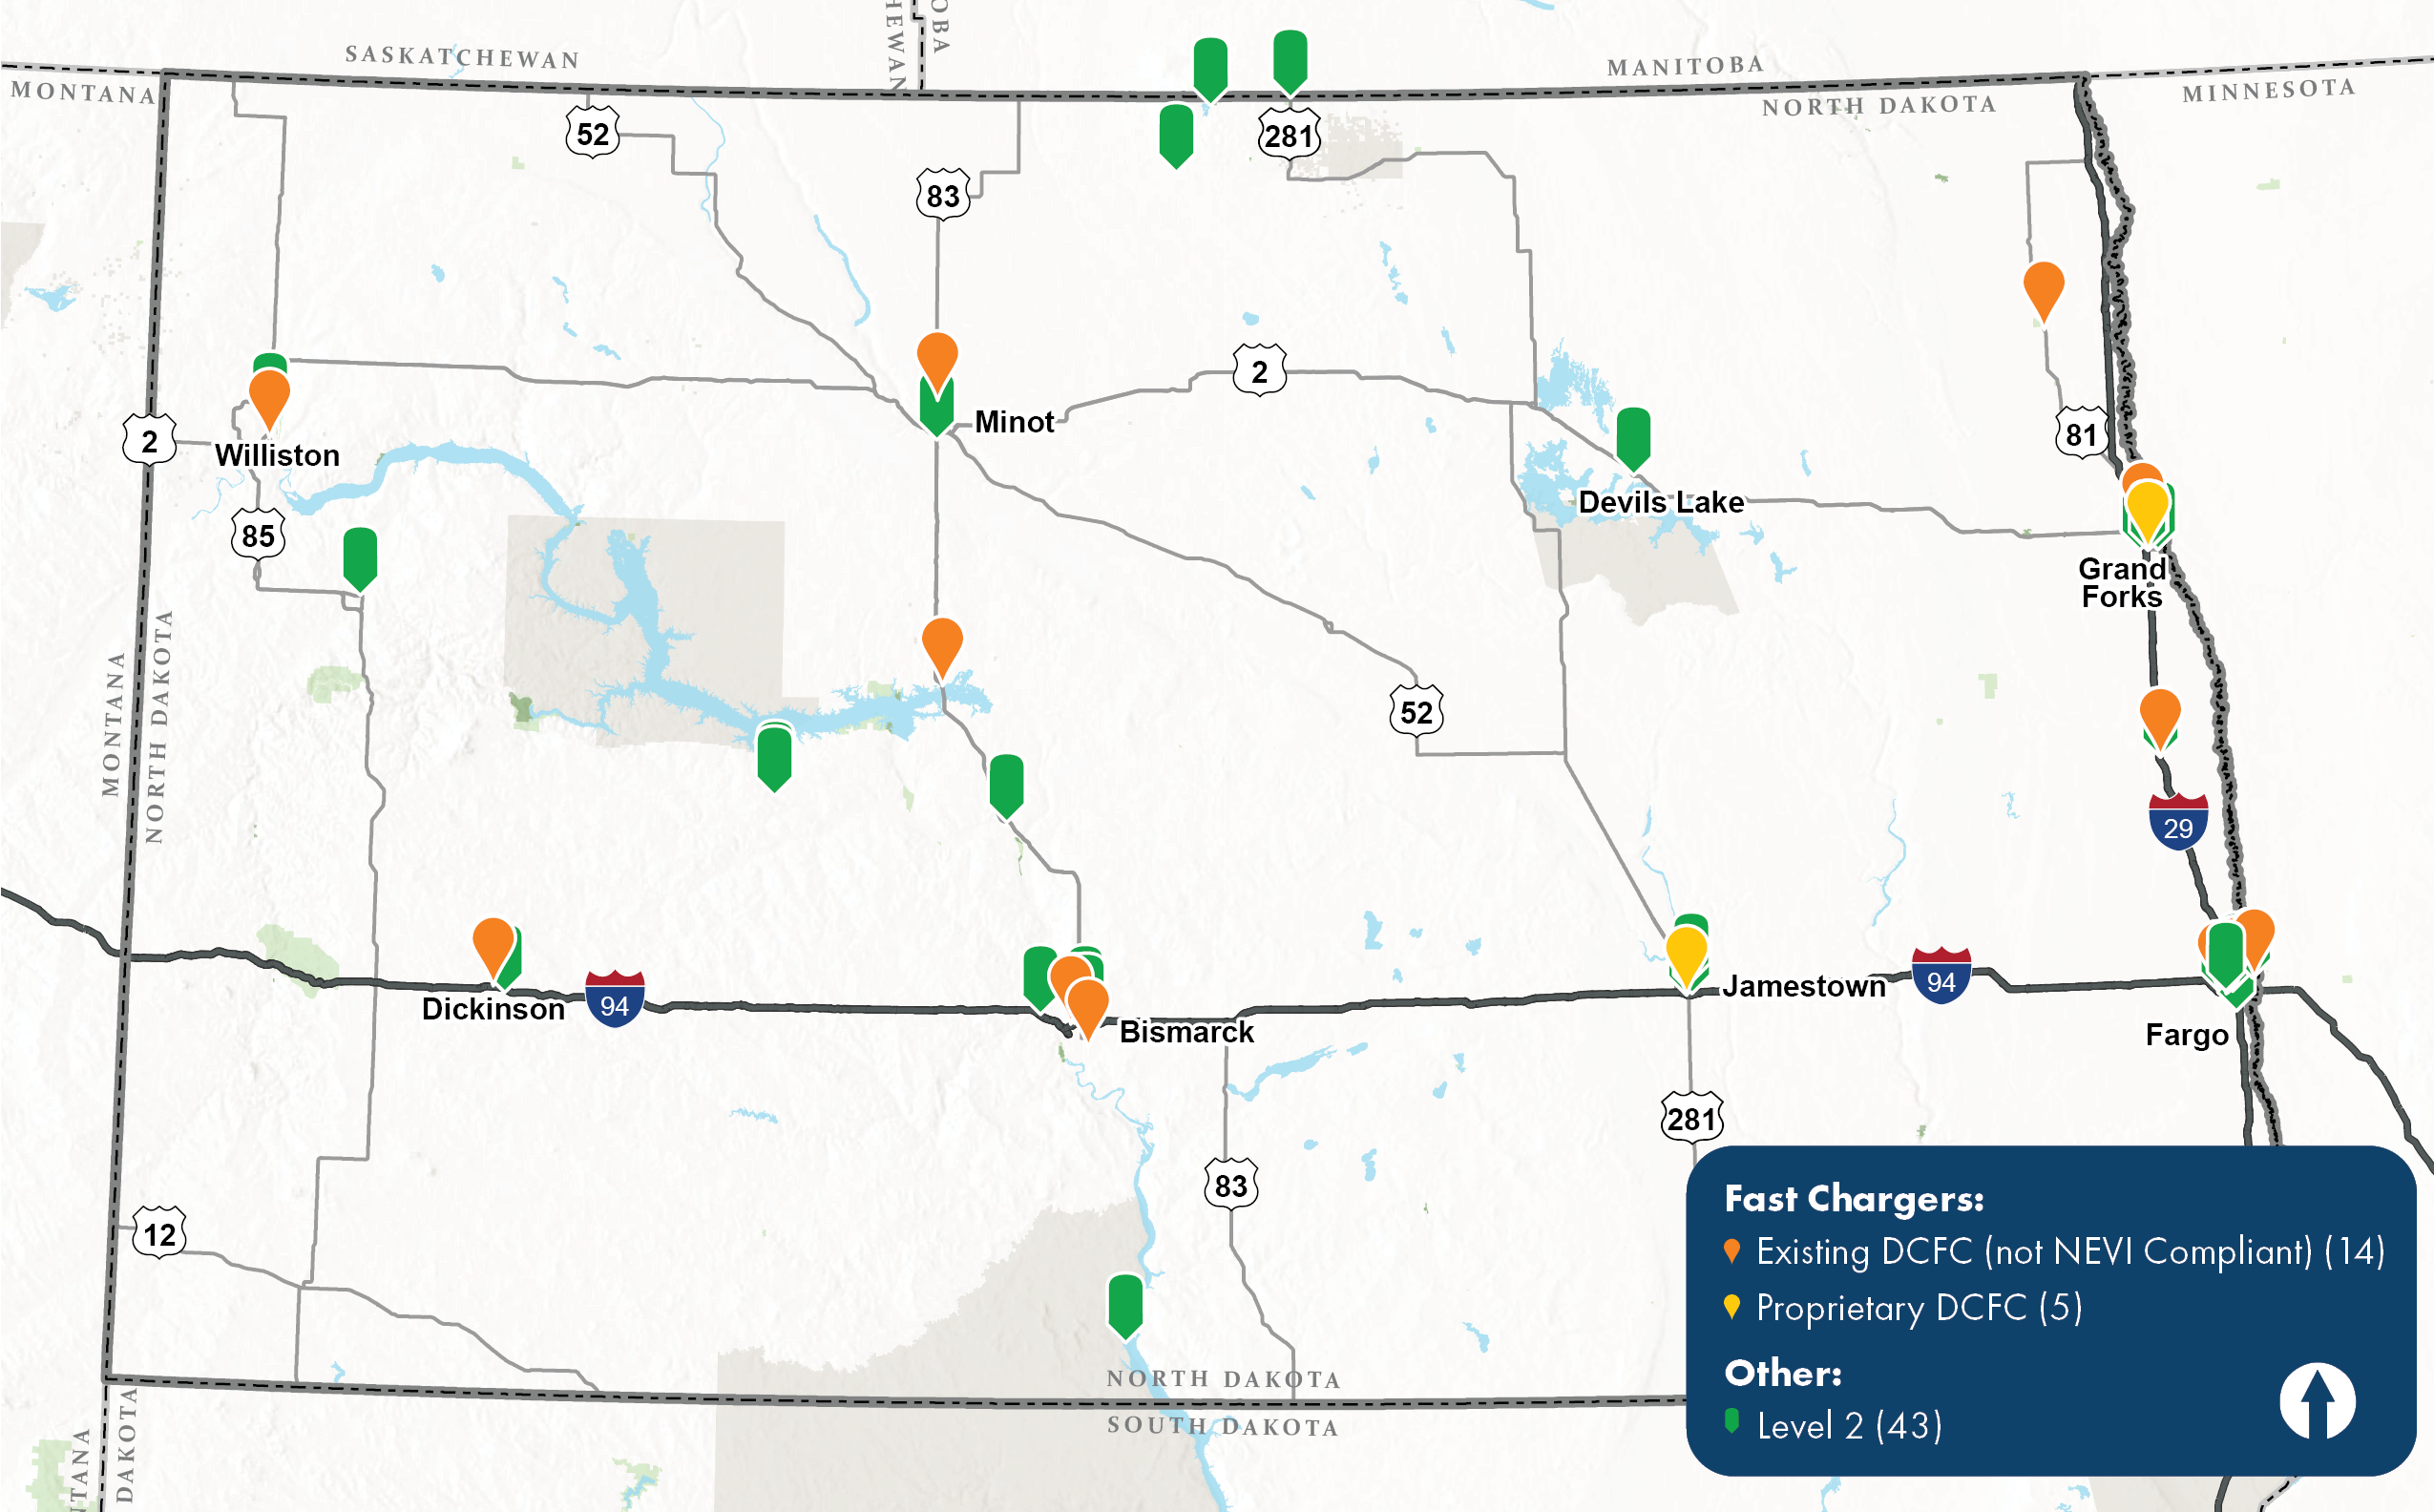 map showing locations of chargers across the state of ND.